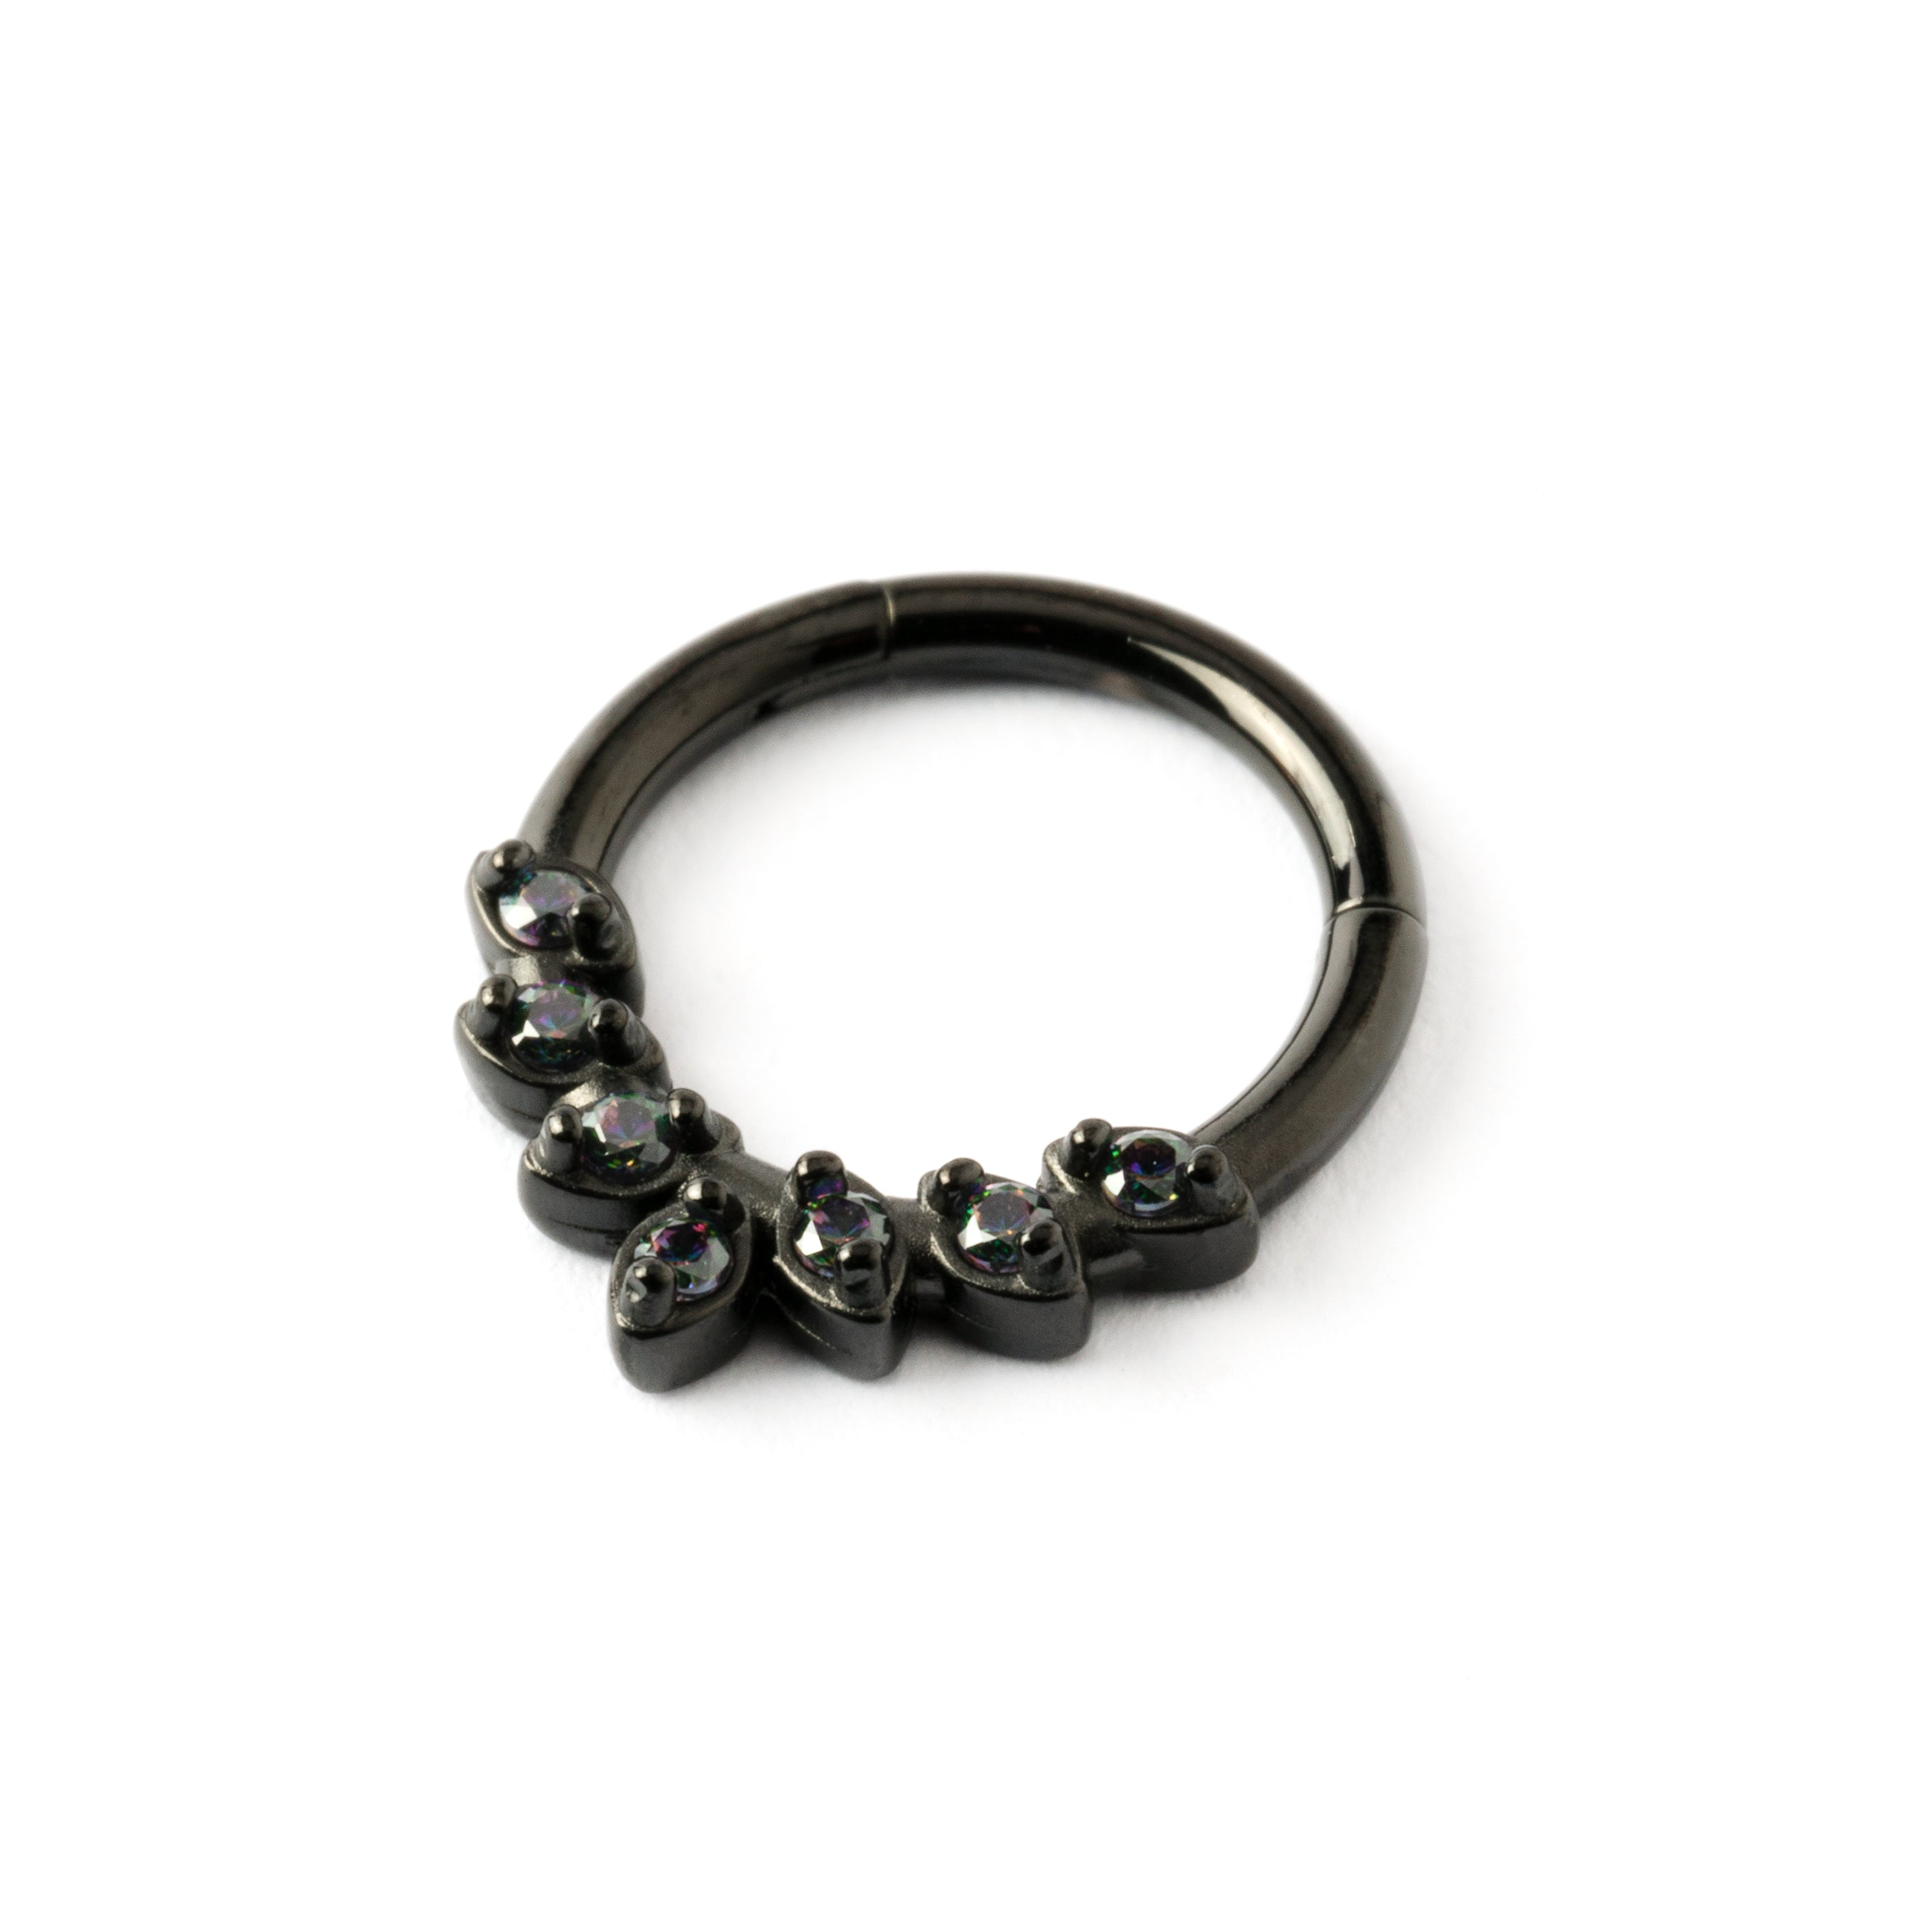 Black surgical steel teardrop petals septum clicker with crystals left side view